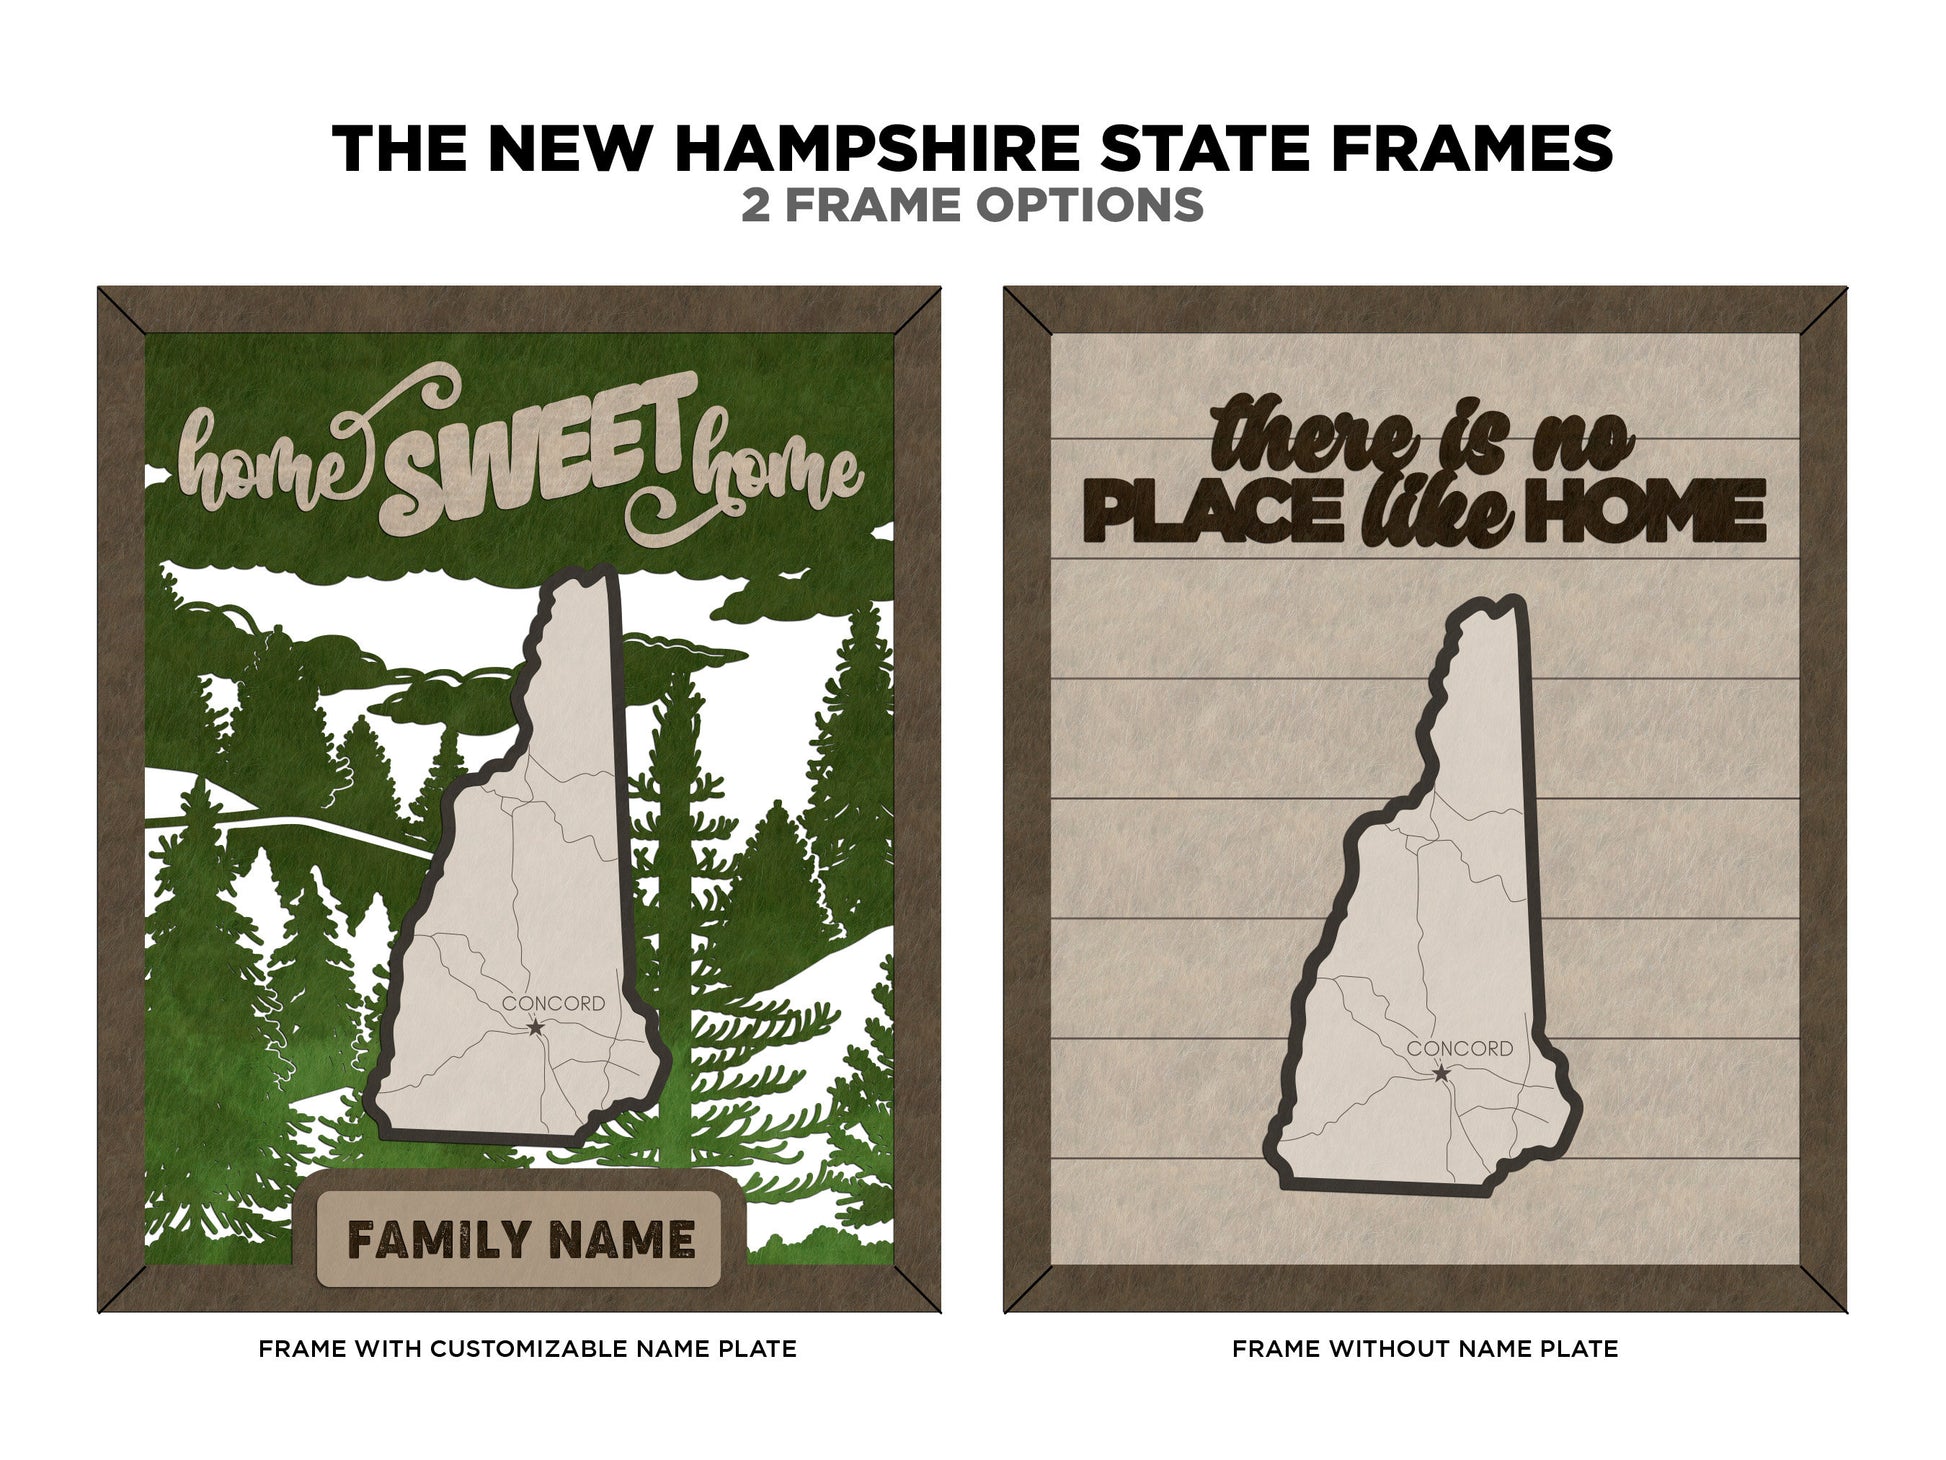 The New Hampshire State Frame - 13 text options, 12 backgrounds, 25 icons Included - Make over 7,500 designs - Glowforge & Lightburn Tested